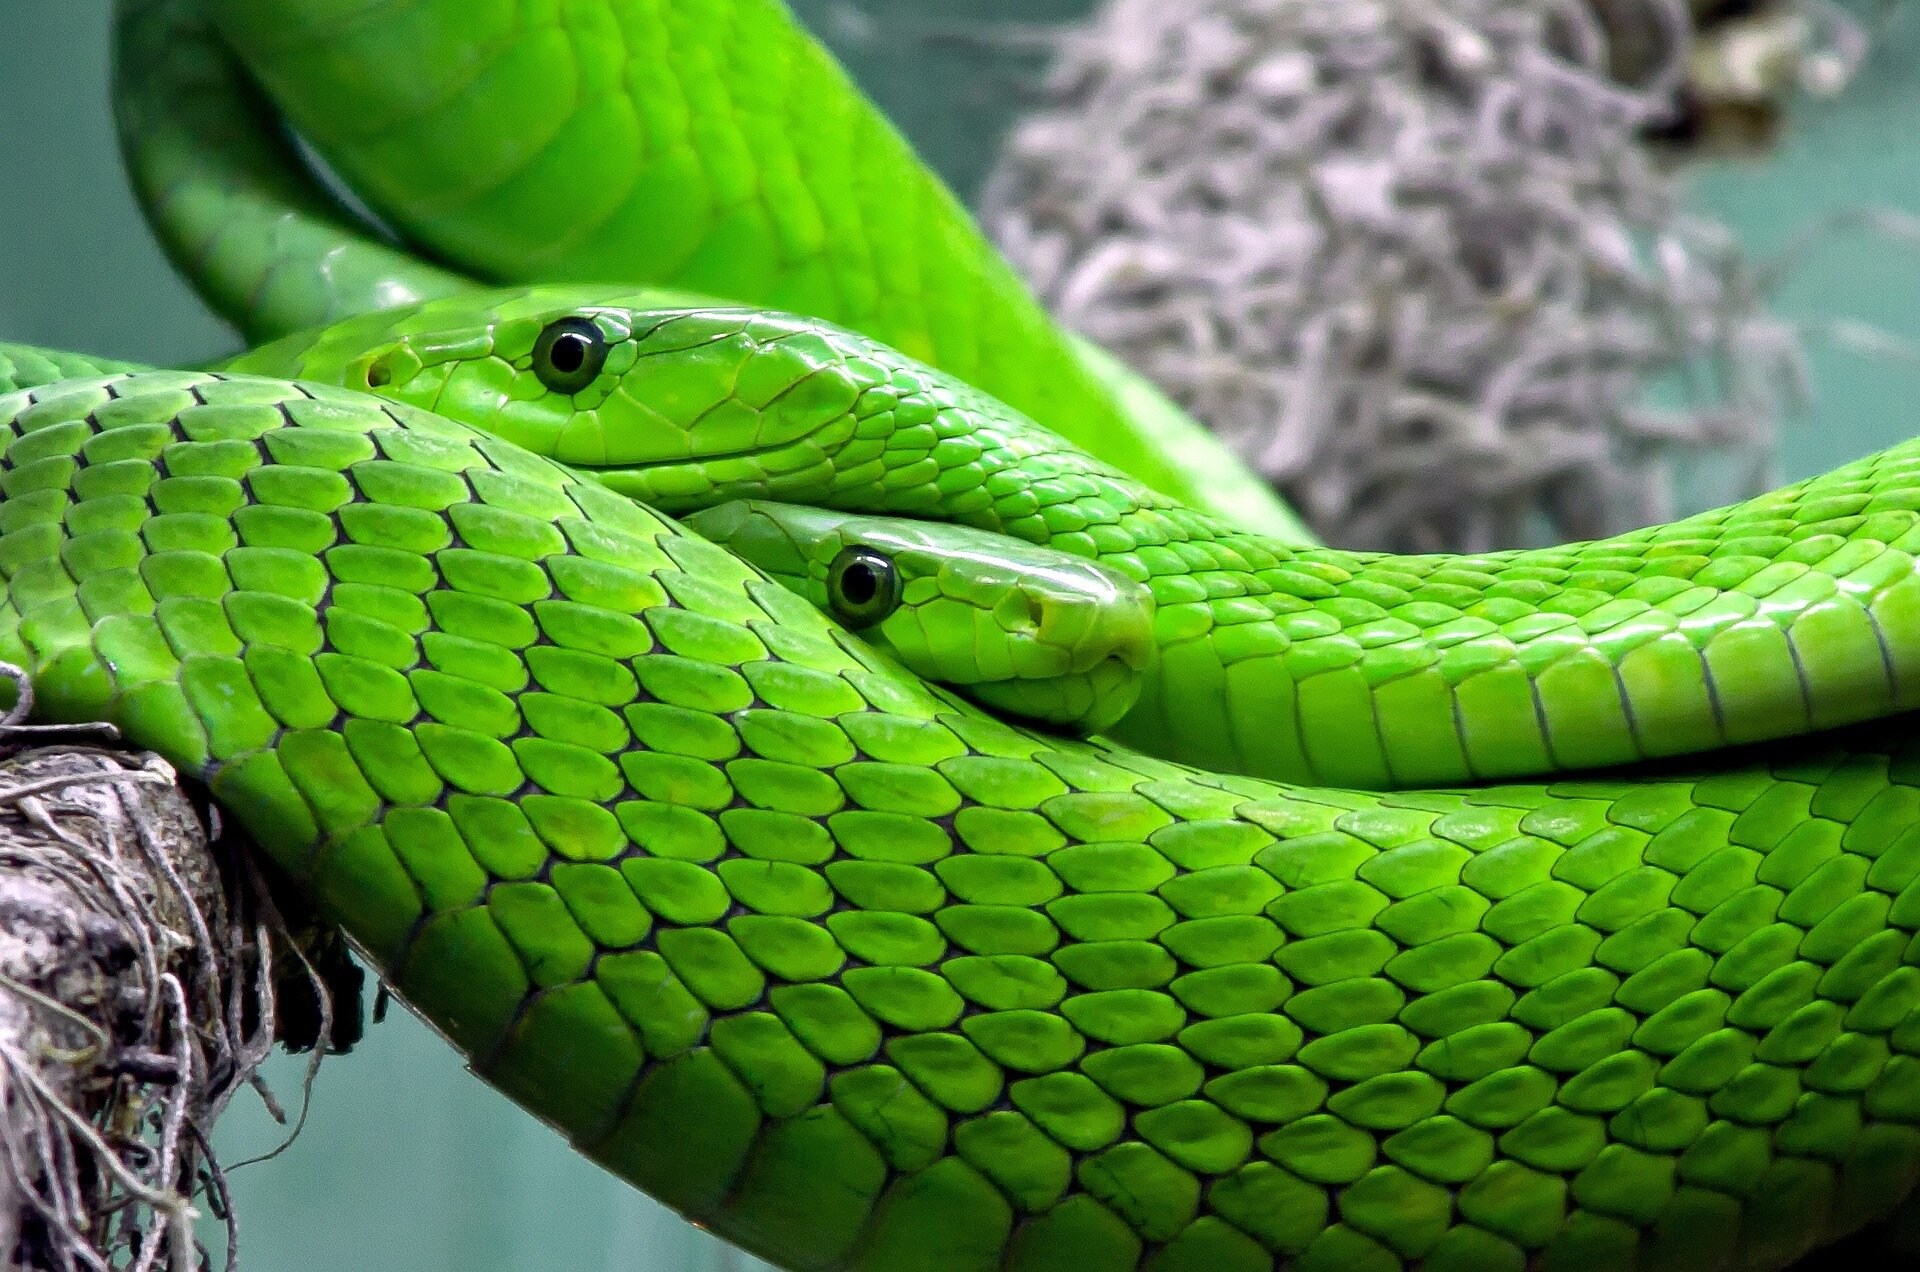 Collecting live snakes in remote Amazon regions for study is no easy task—here's how we do it